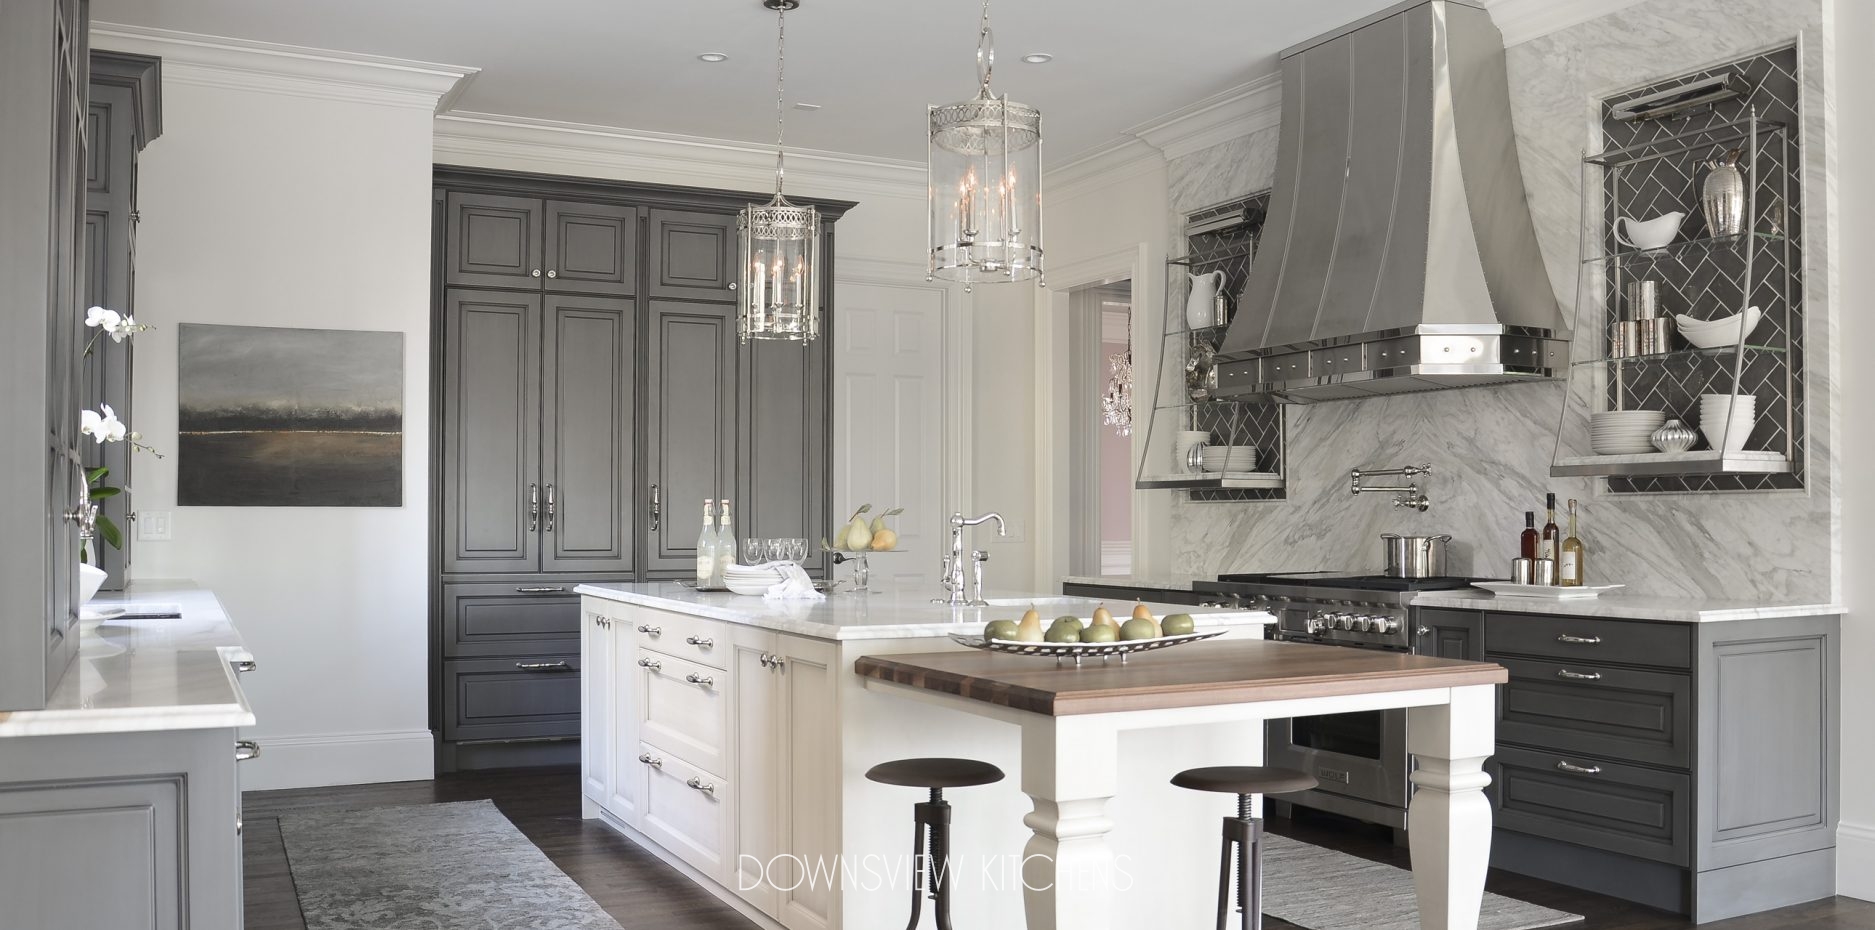 THE CULTIVATED LIFE - Downsview Kitchens and Fine Custom Cabinetry ...